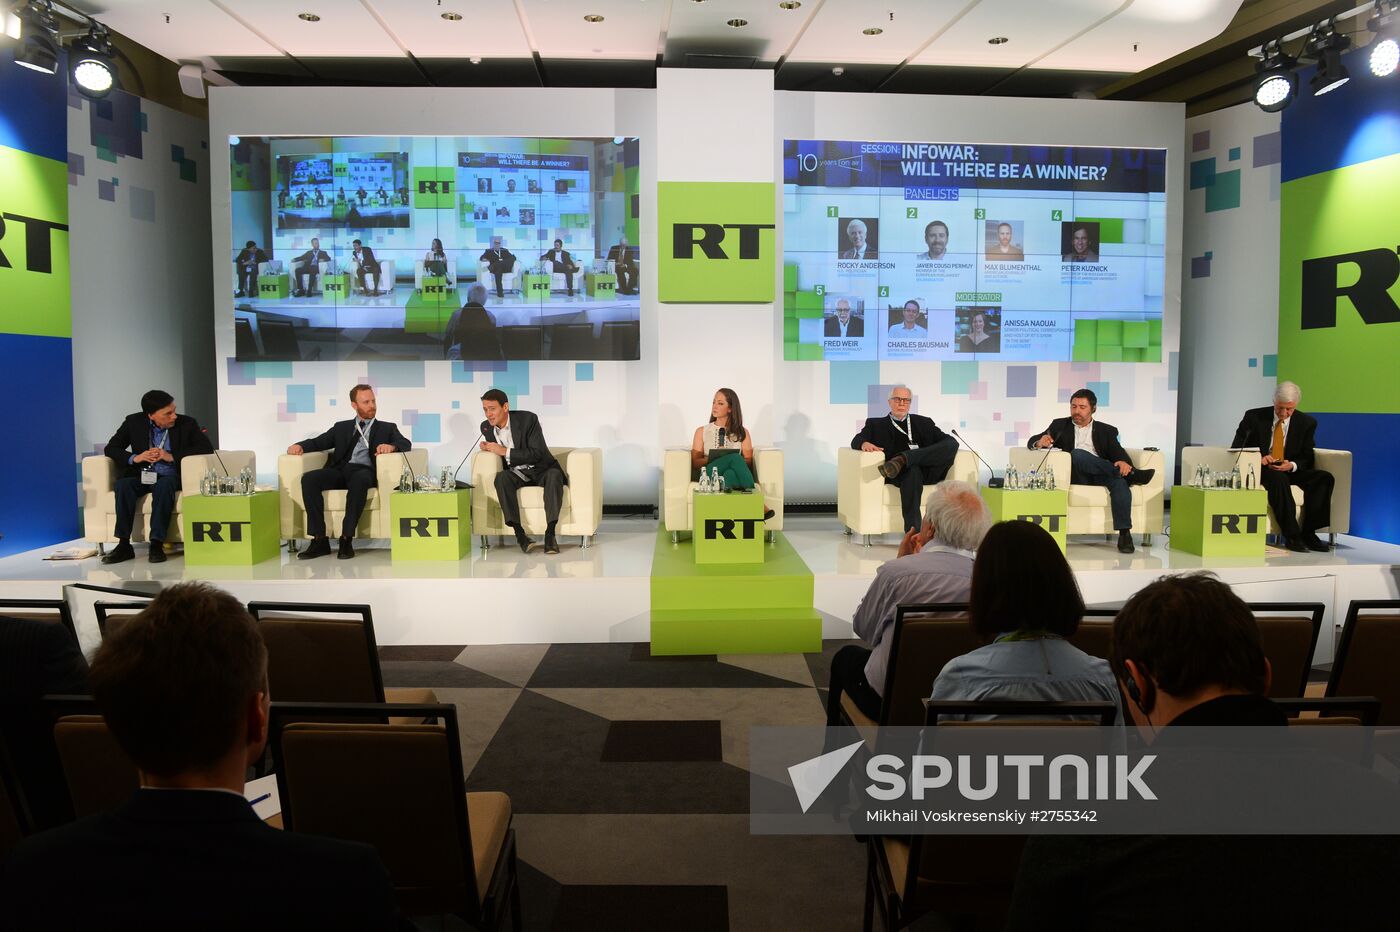 RT conference, Information, Messages, Politics: The Shape-shifting Powers in Today’s World